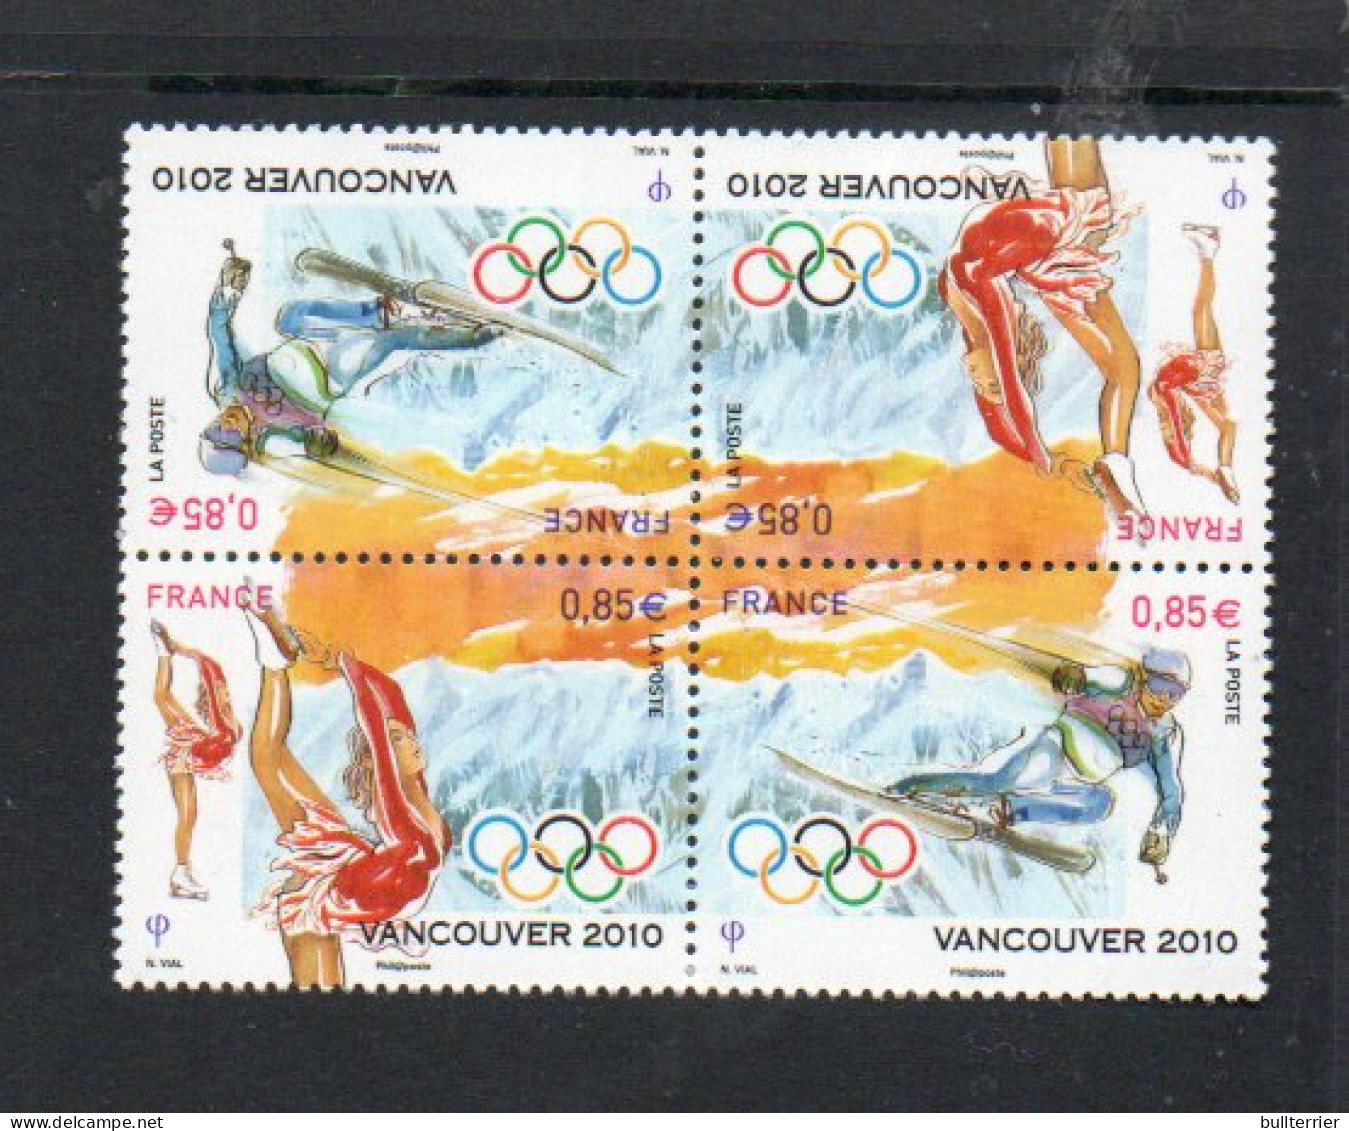 OLYMPICS - FRANCE -2010- VANCOUVER OLYMPCIS SET OF 2 IN SE TENANT BLOCK OF 4  MINT NEVER HINGED  SG CAT £16 - Inverno2010: Vancouver